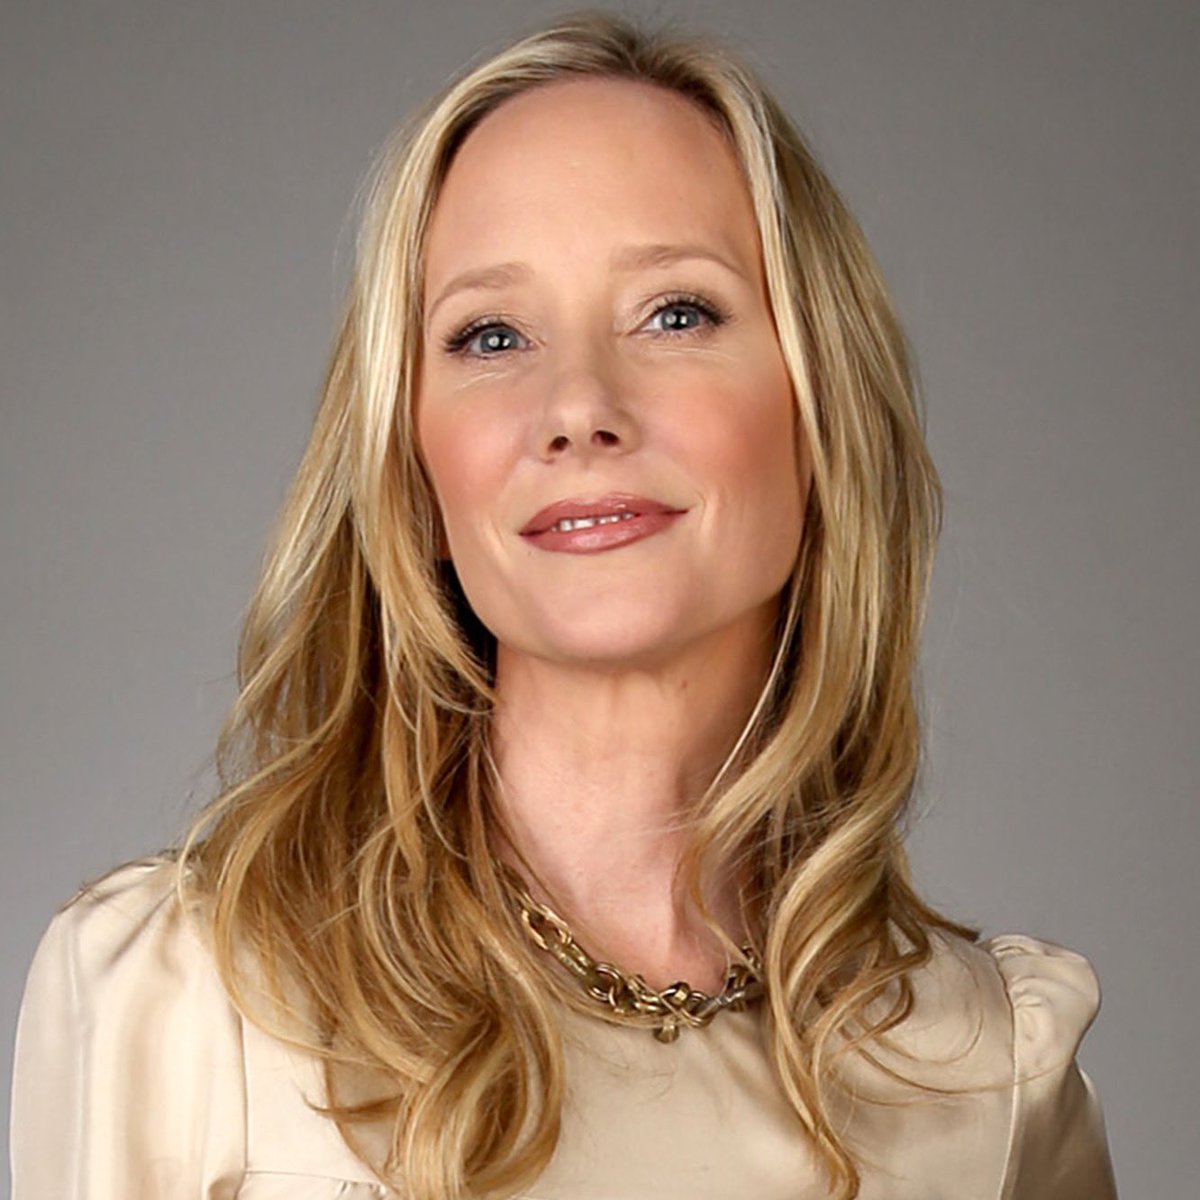 A year ago today, Anne Heche passed away at the age of 53 #RIPAnneHeche instagram.com/p/Cv21iL-vCC2/…